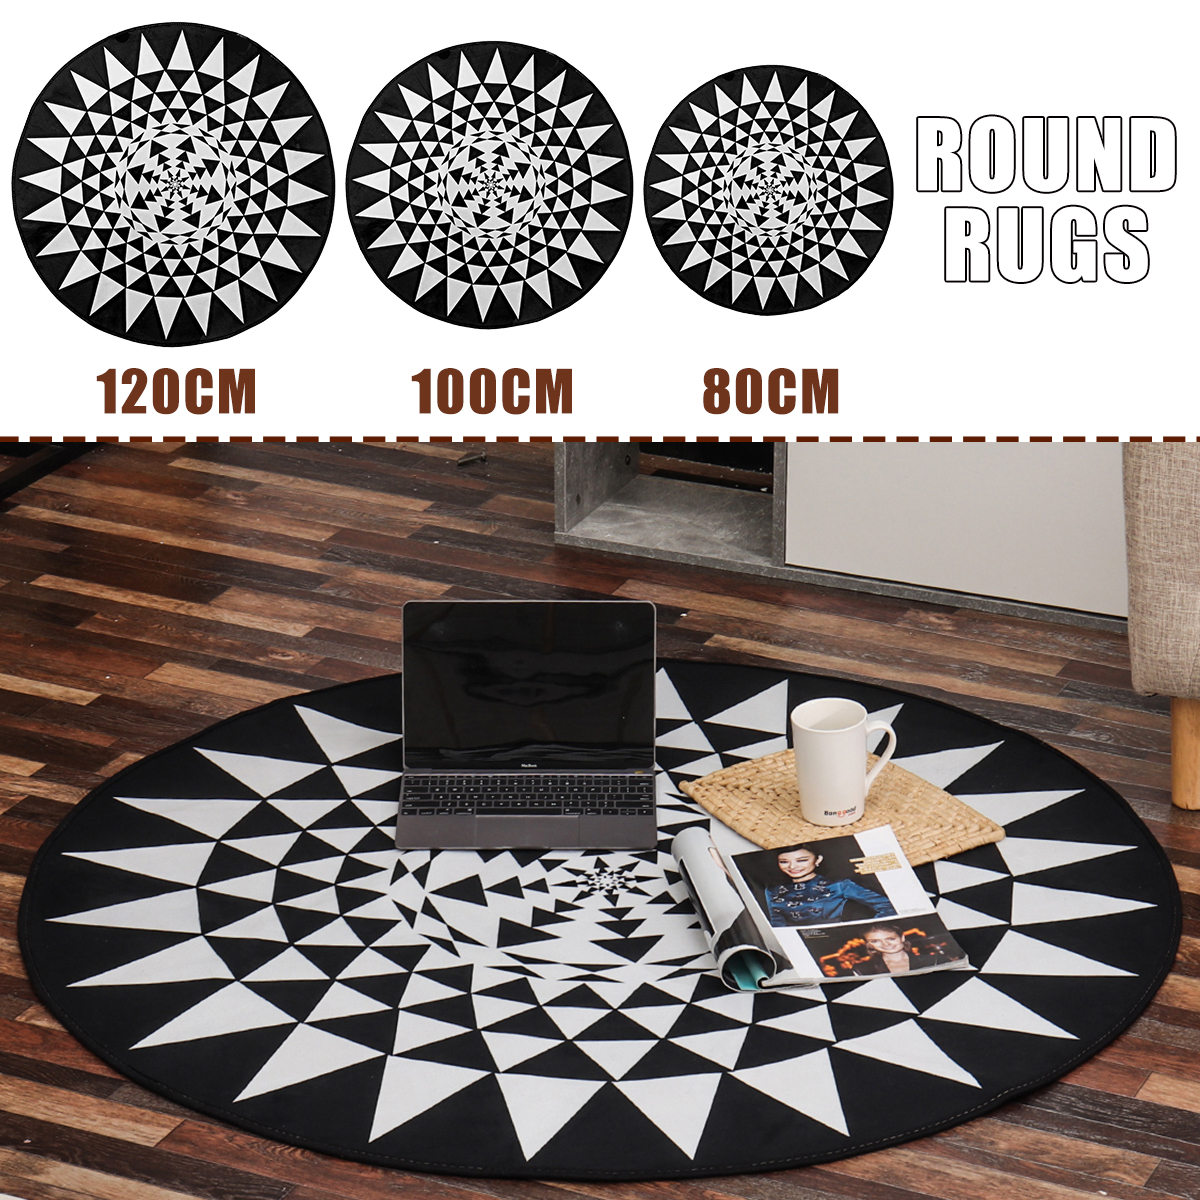 Round Rugs Floor Carpets Soft to Touch Extra Large Mats